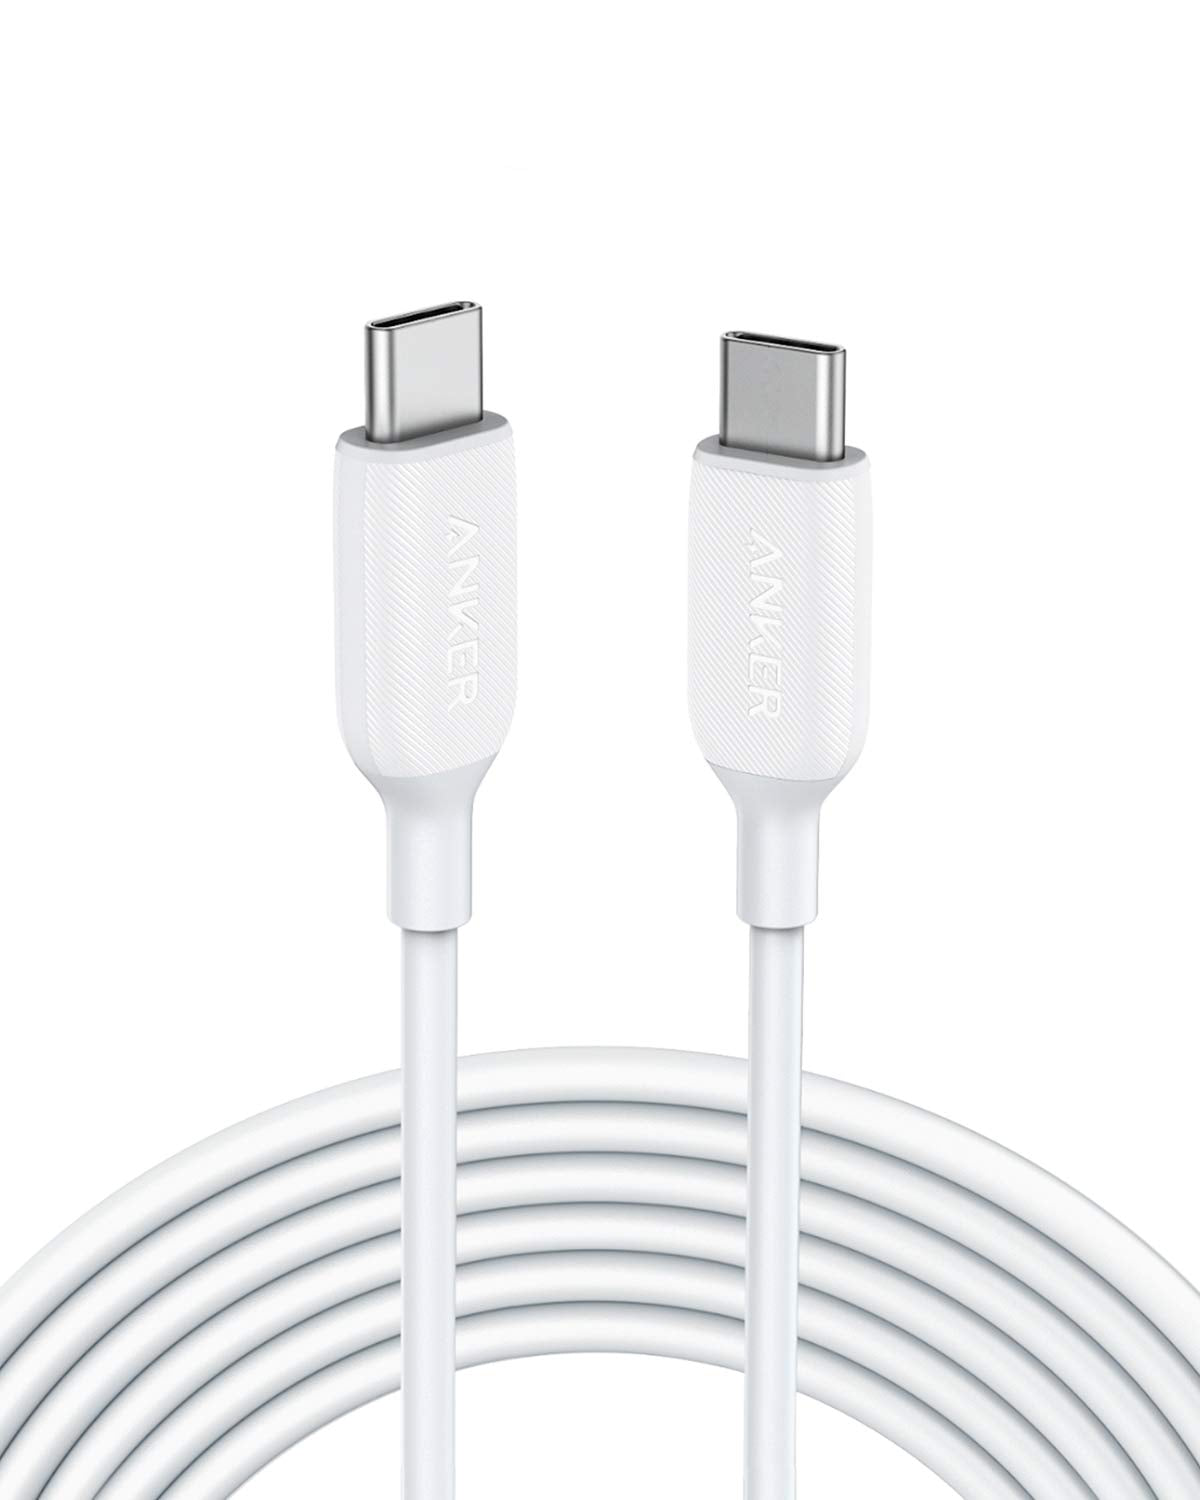 Photos - Cable (video, audio, USB) ANKER 541 USB-C to USB-C Cable White / 10ft A8854021 